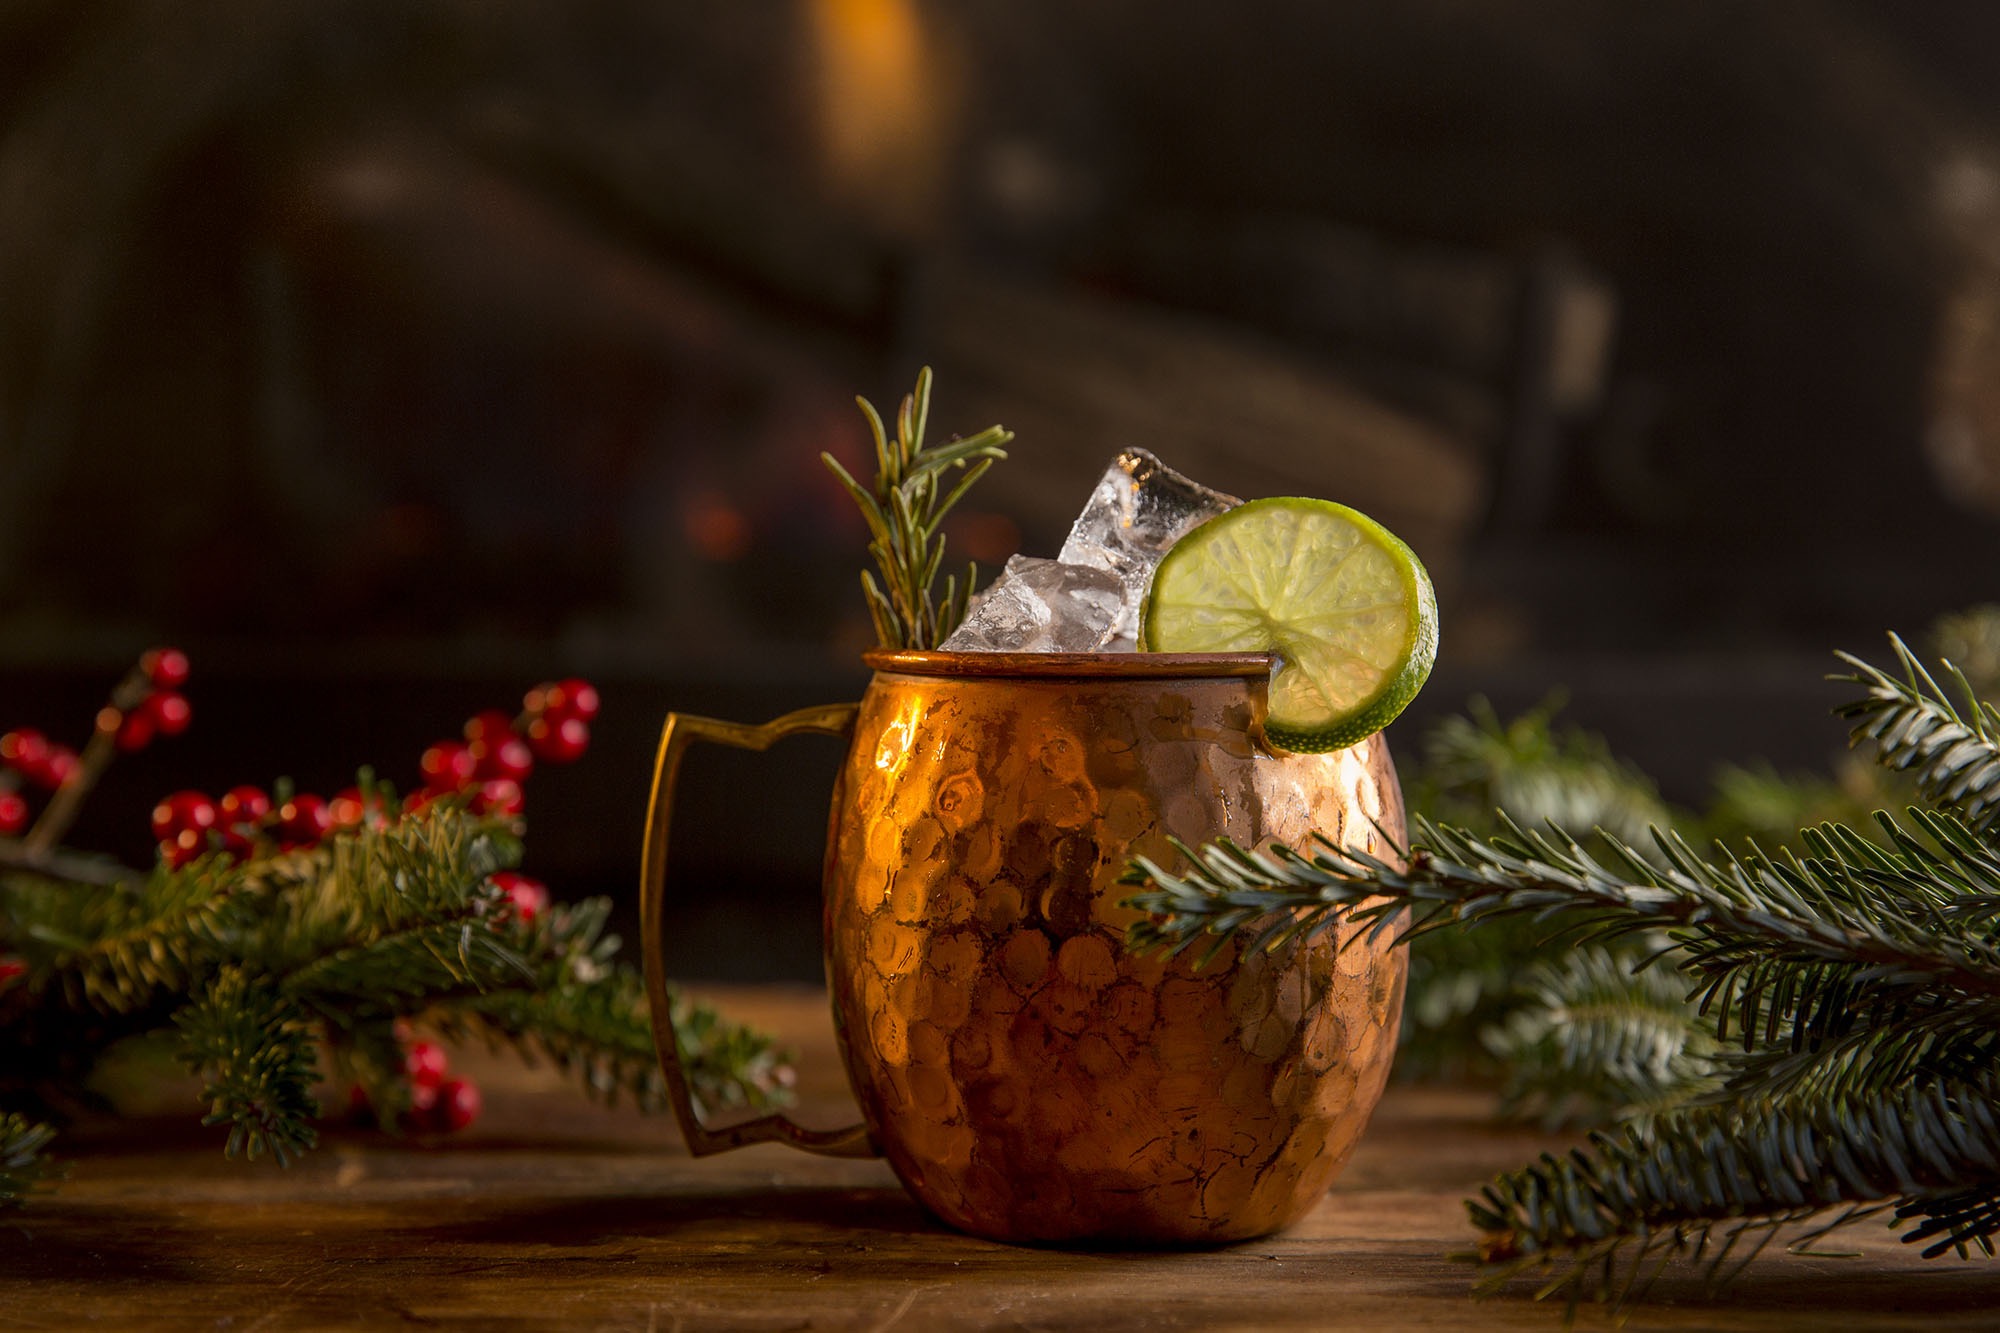 A Moscow mule drink in a festive setting.